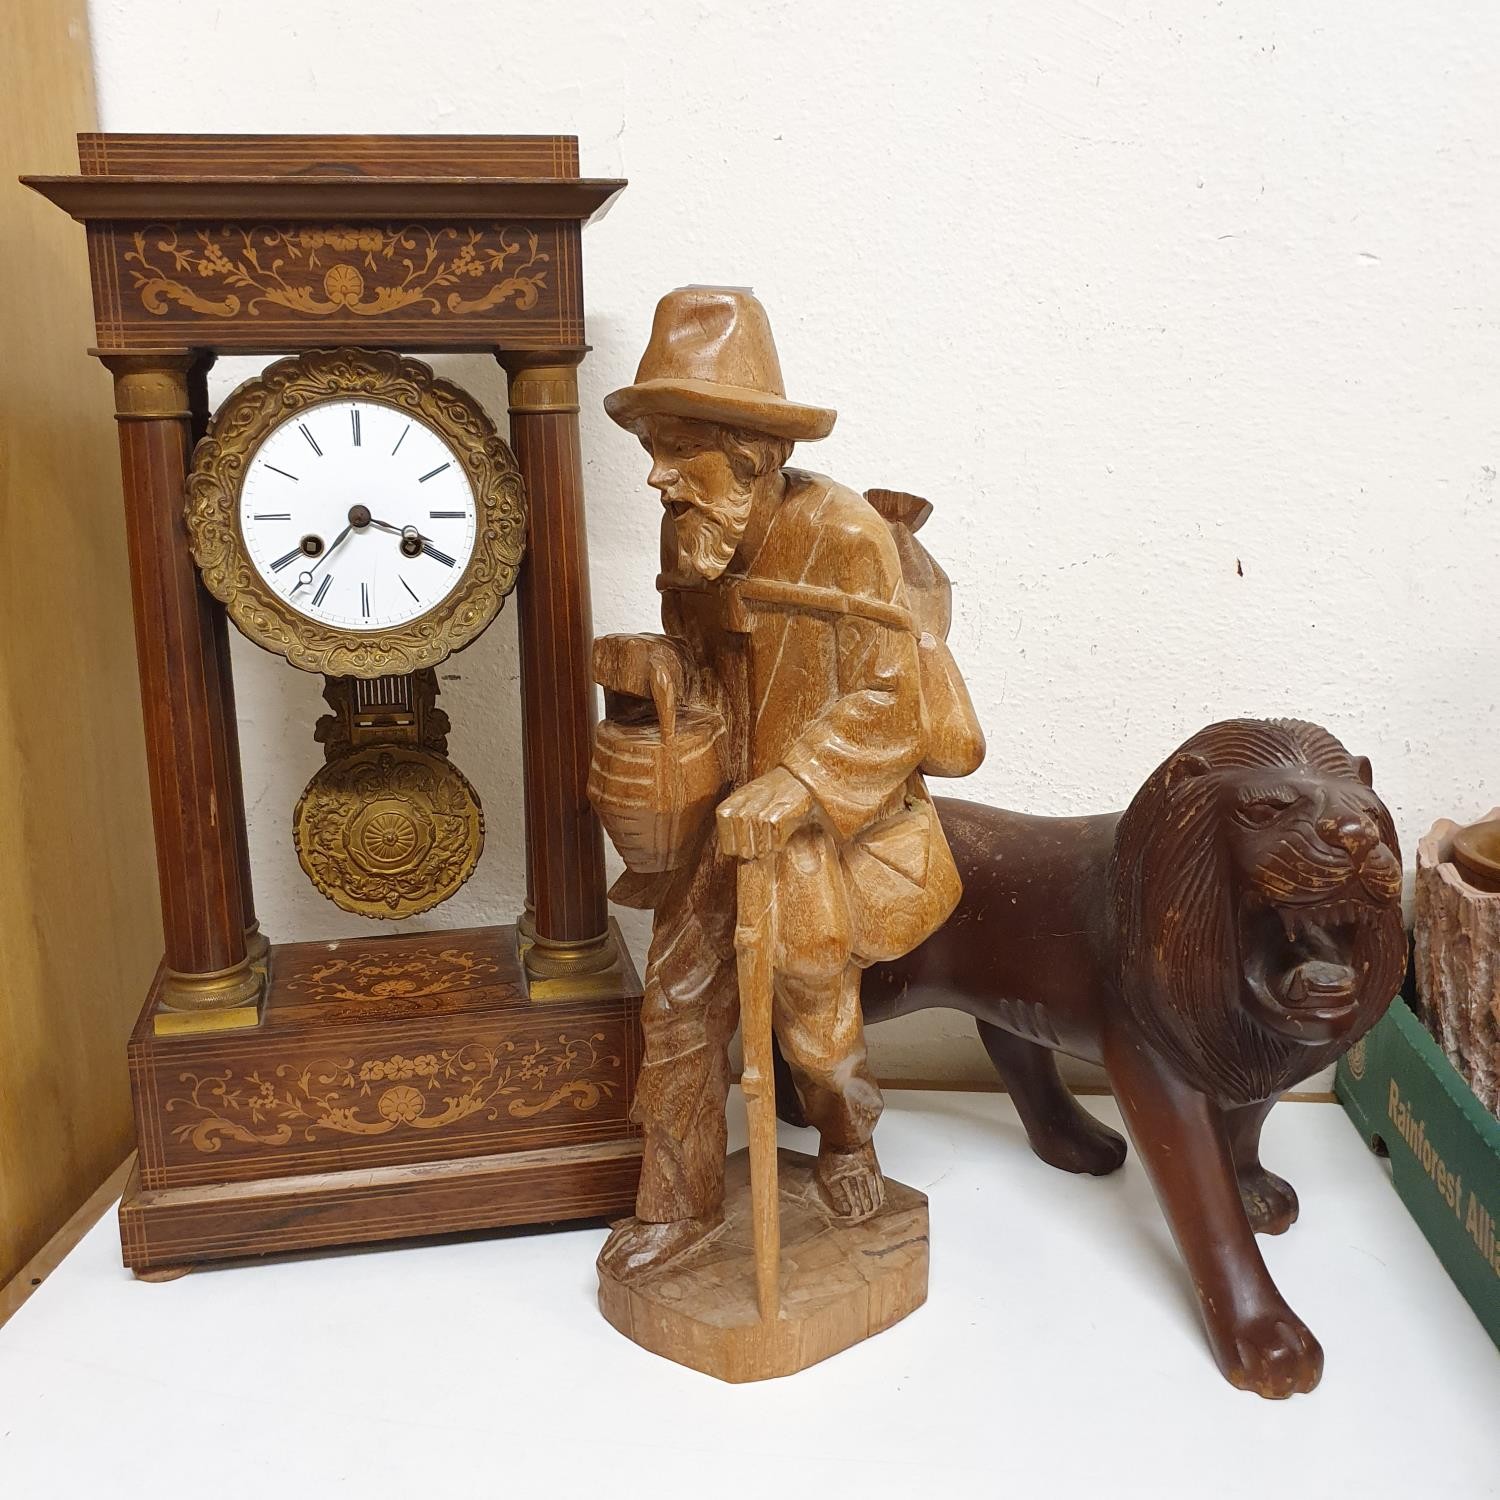 A portico clock, in a rosewood case, 50 cm high, a carved figure of a man, 47 cm high, and a